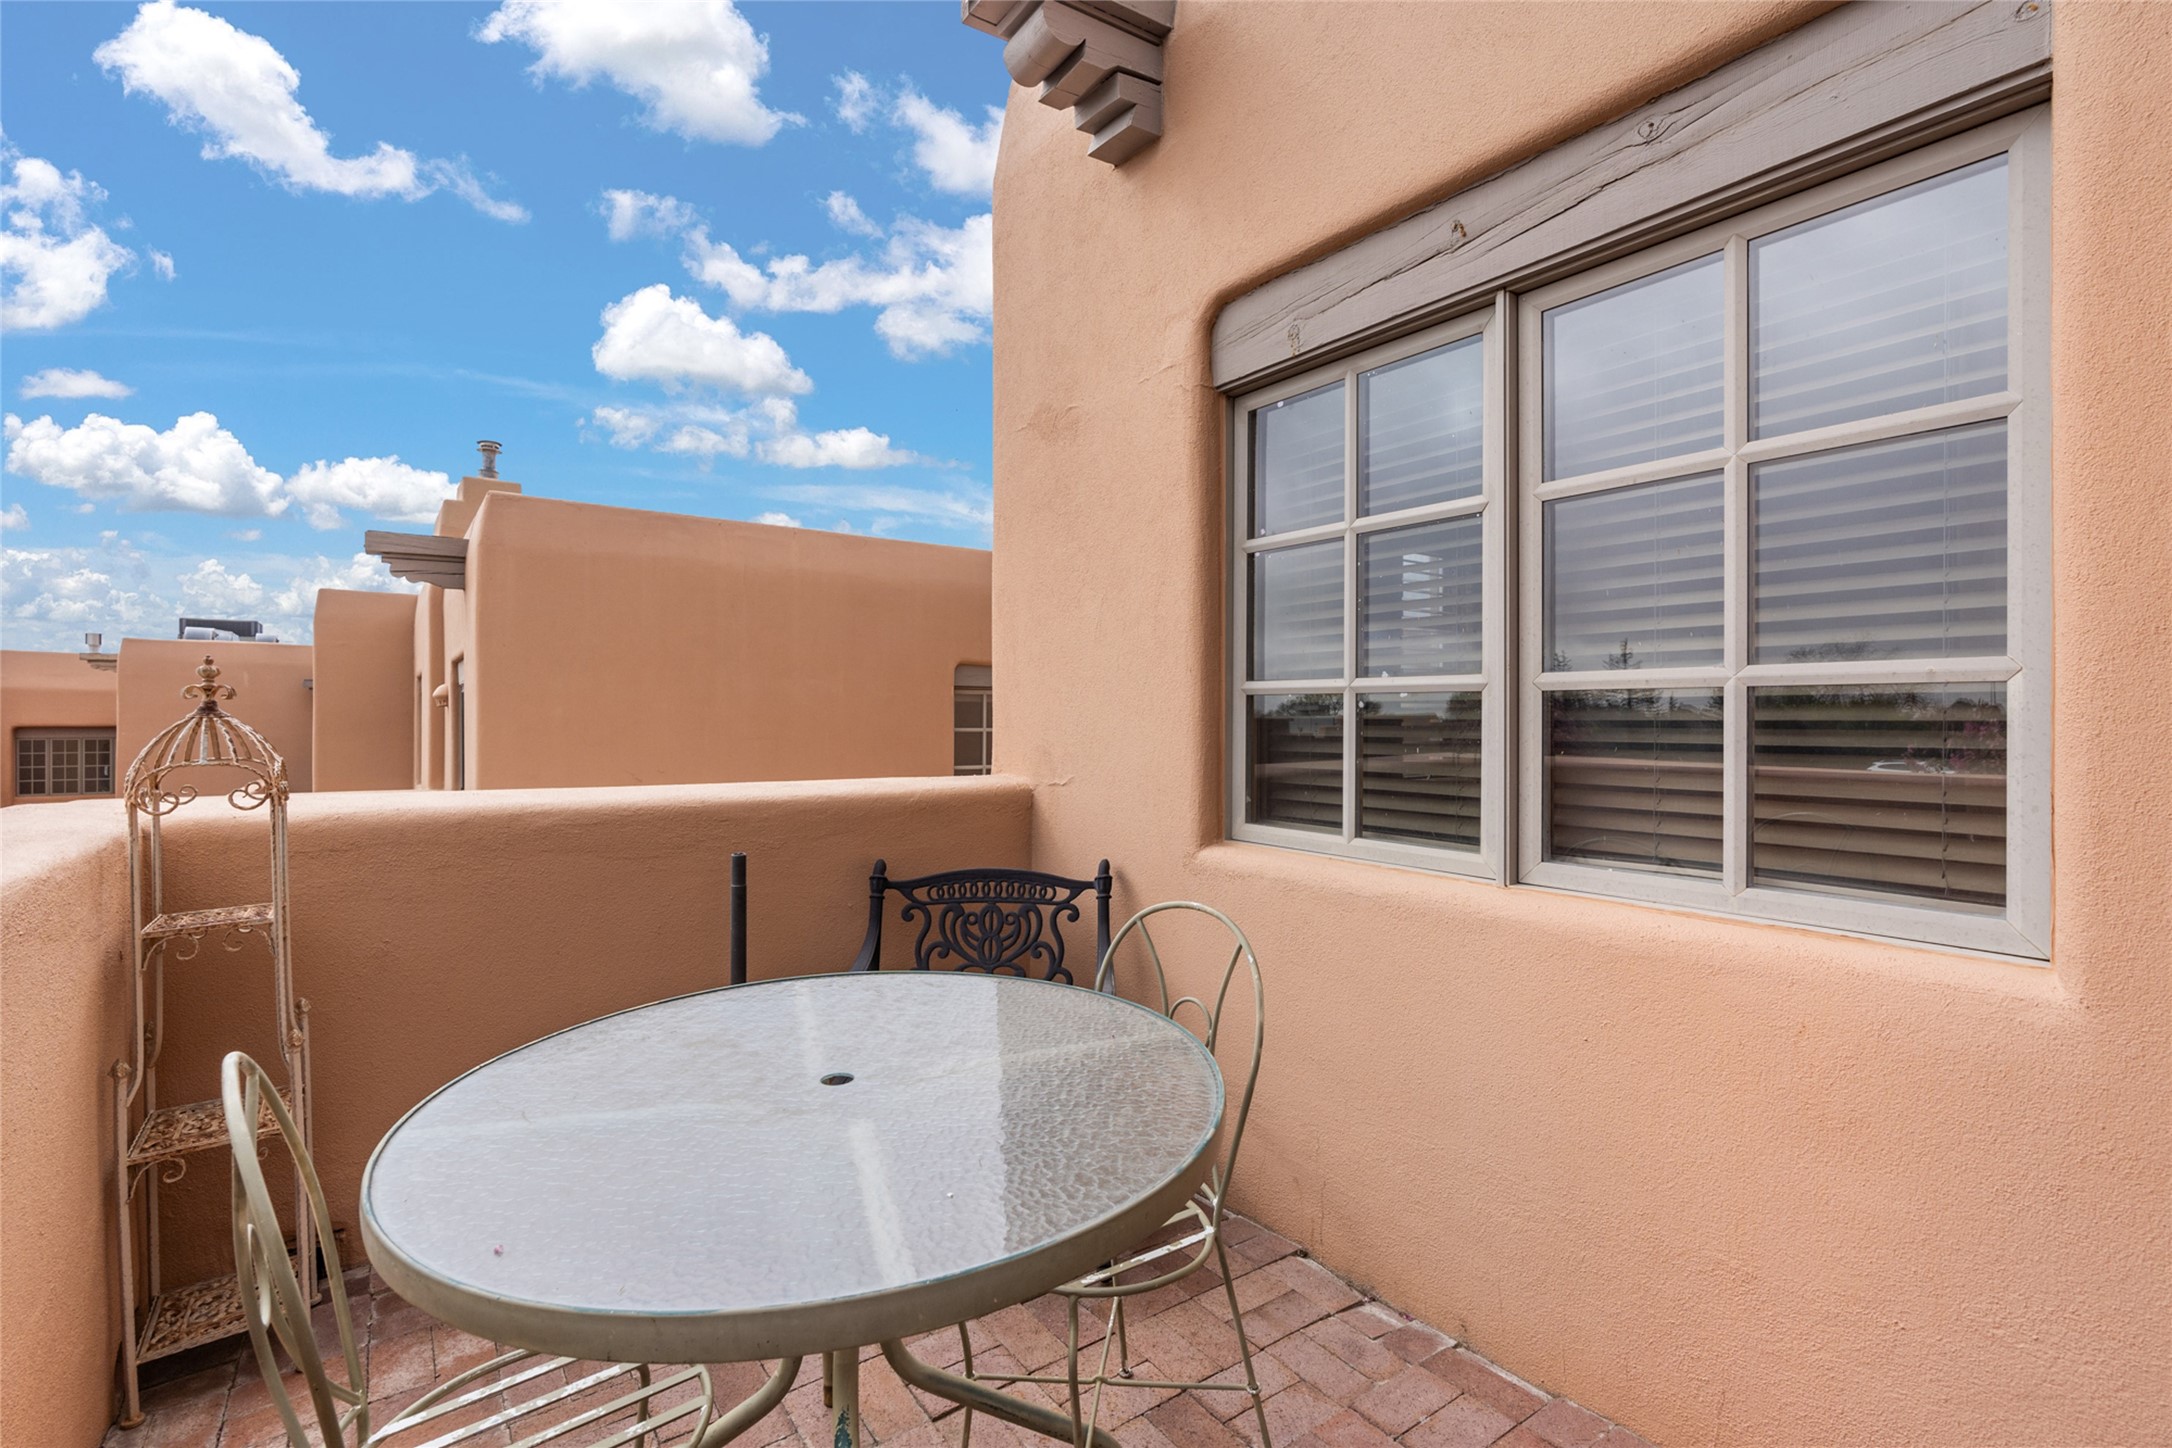 3101 Old Pecos Trail 238, Santa Fe, New Mexico 87505, 2 Bedrooms Bedrooms, ,2 BathroomsBathrooms,Residential,For Sale,3101 Old Pecos Trail 238,202401546